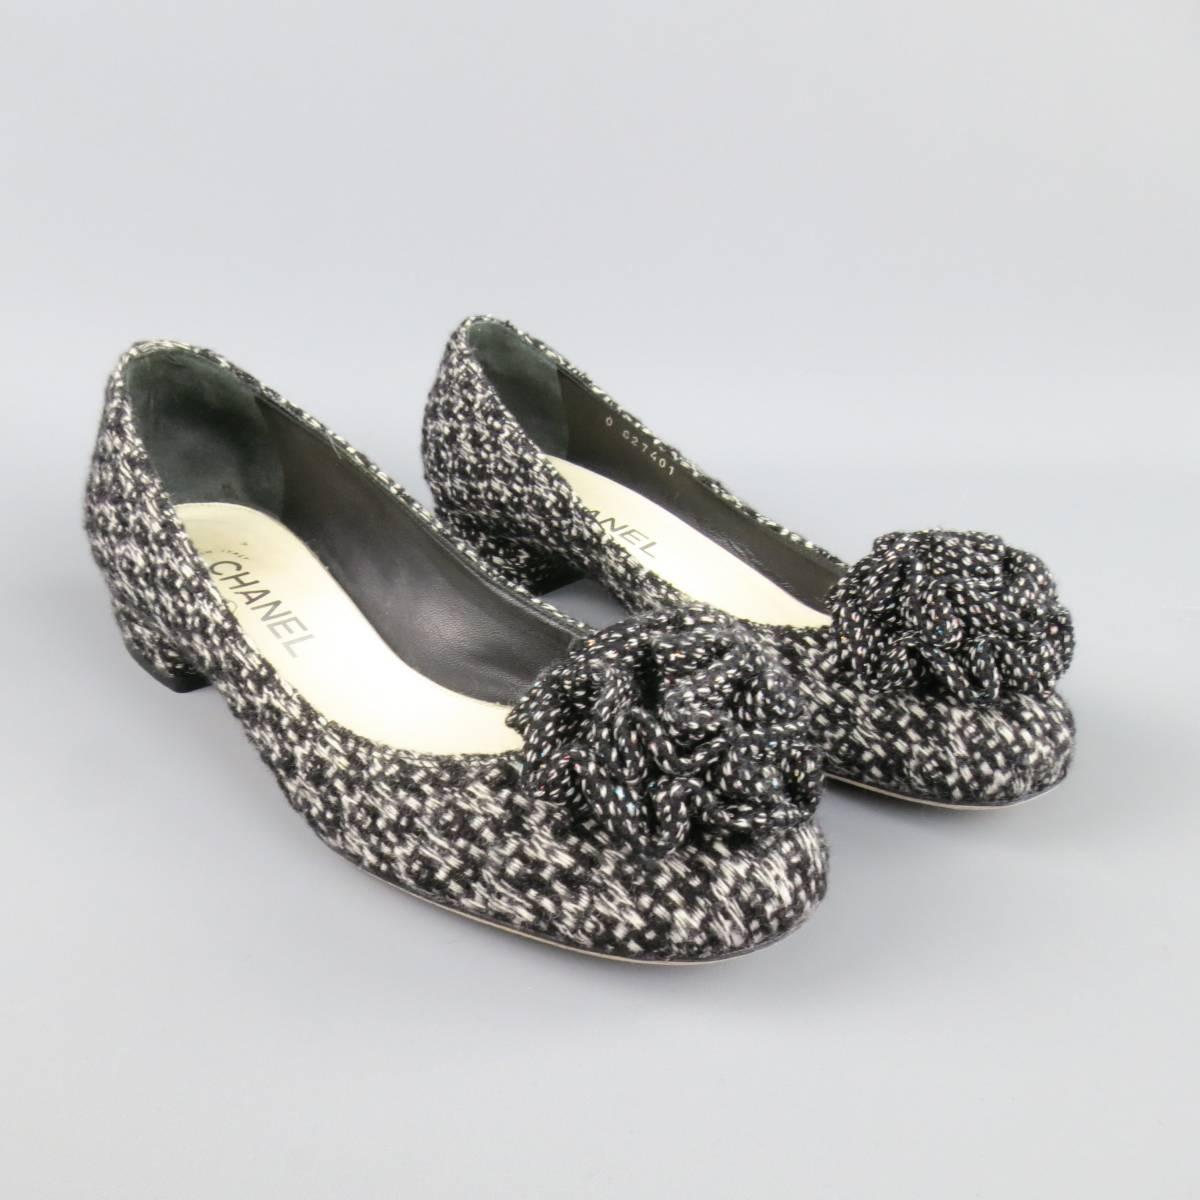 CHANEL black and white tweed ballet flats feature 'Camellia' style flower embellishment and chunky covered heel with silver tone 'CC' logo. Includes original box. Made in Italy.
 
Good Pre-Owned Condition. Retails at $875.00.
Marked: 37 1/2 IT
